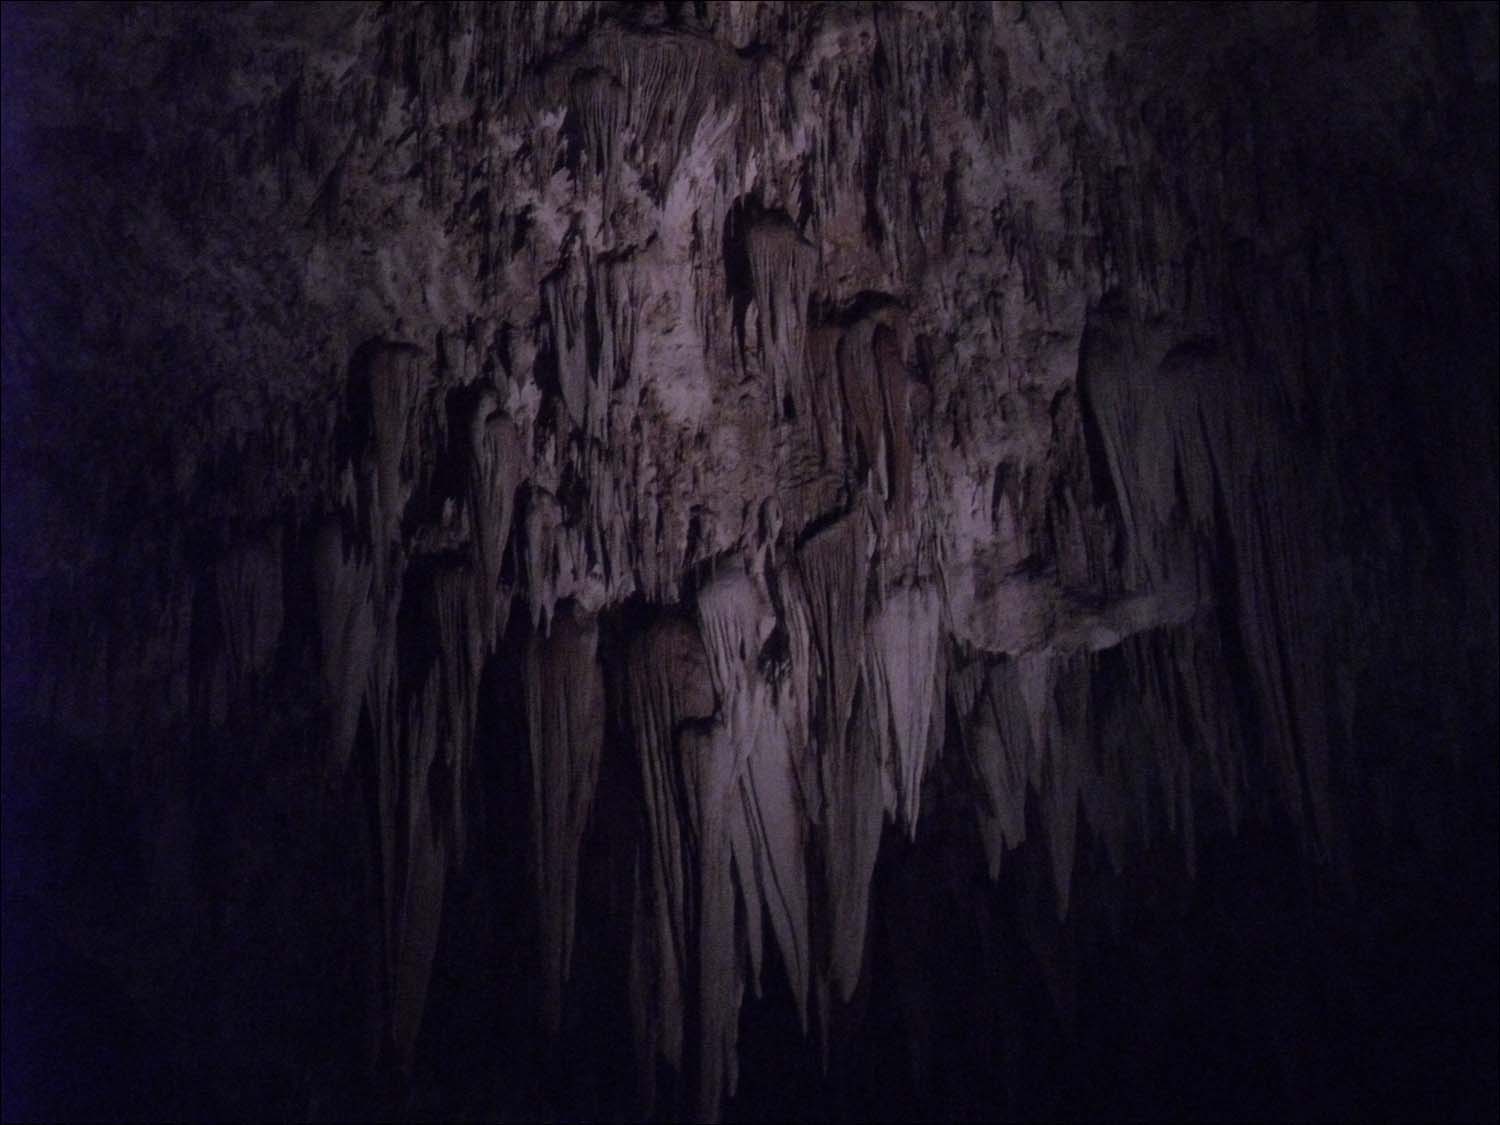 Carlsbad Caverns, NM-ceiling formations including Cathedral